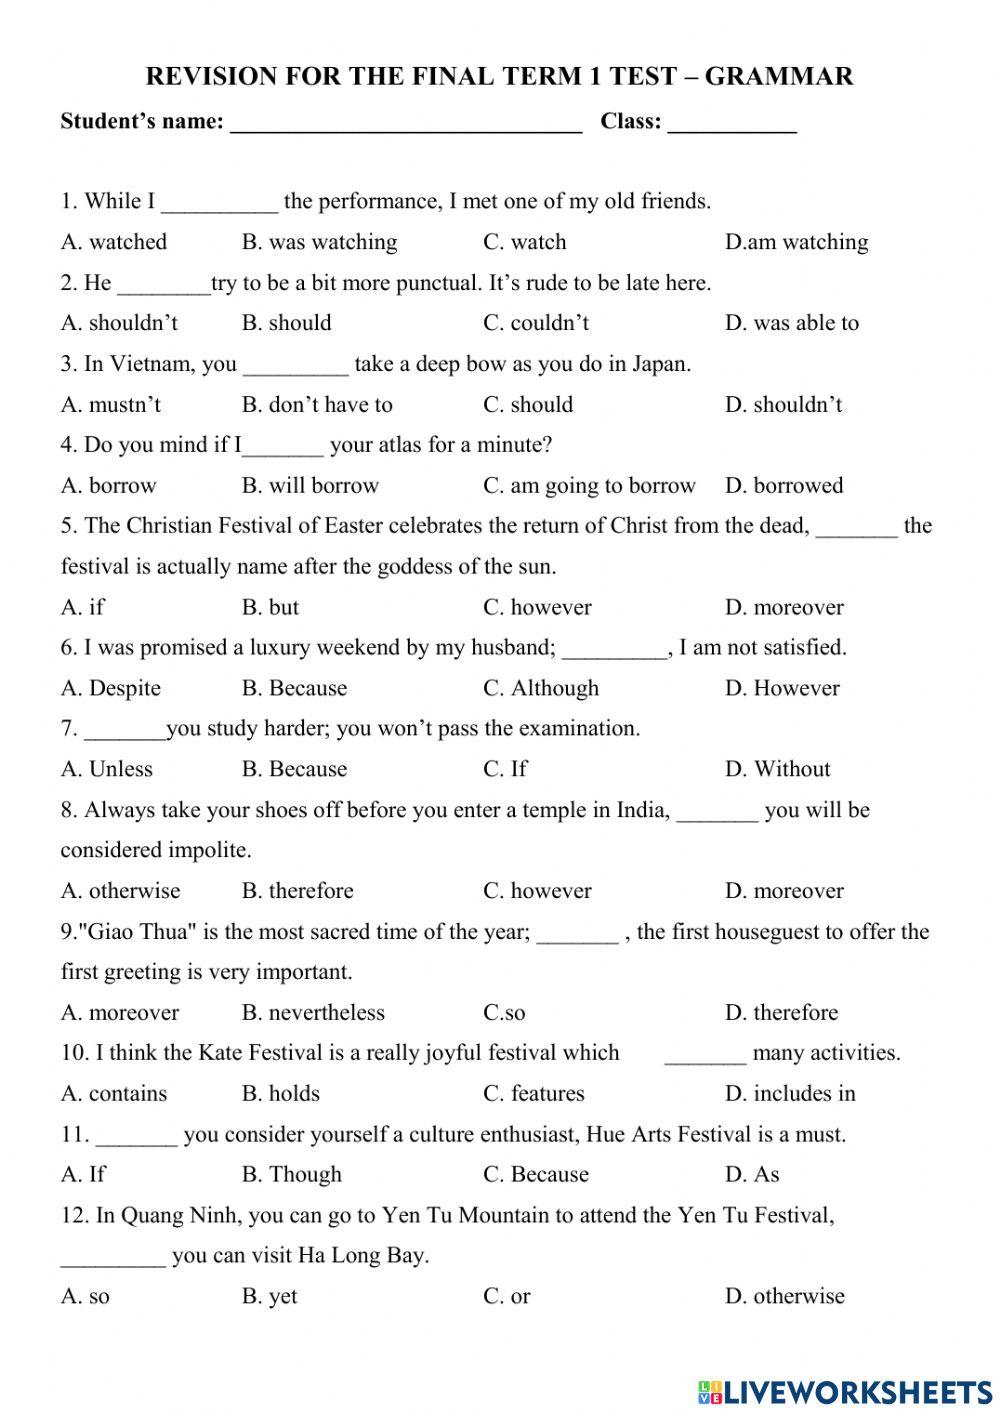 Revision for the final term 1 test – grammar